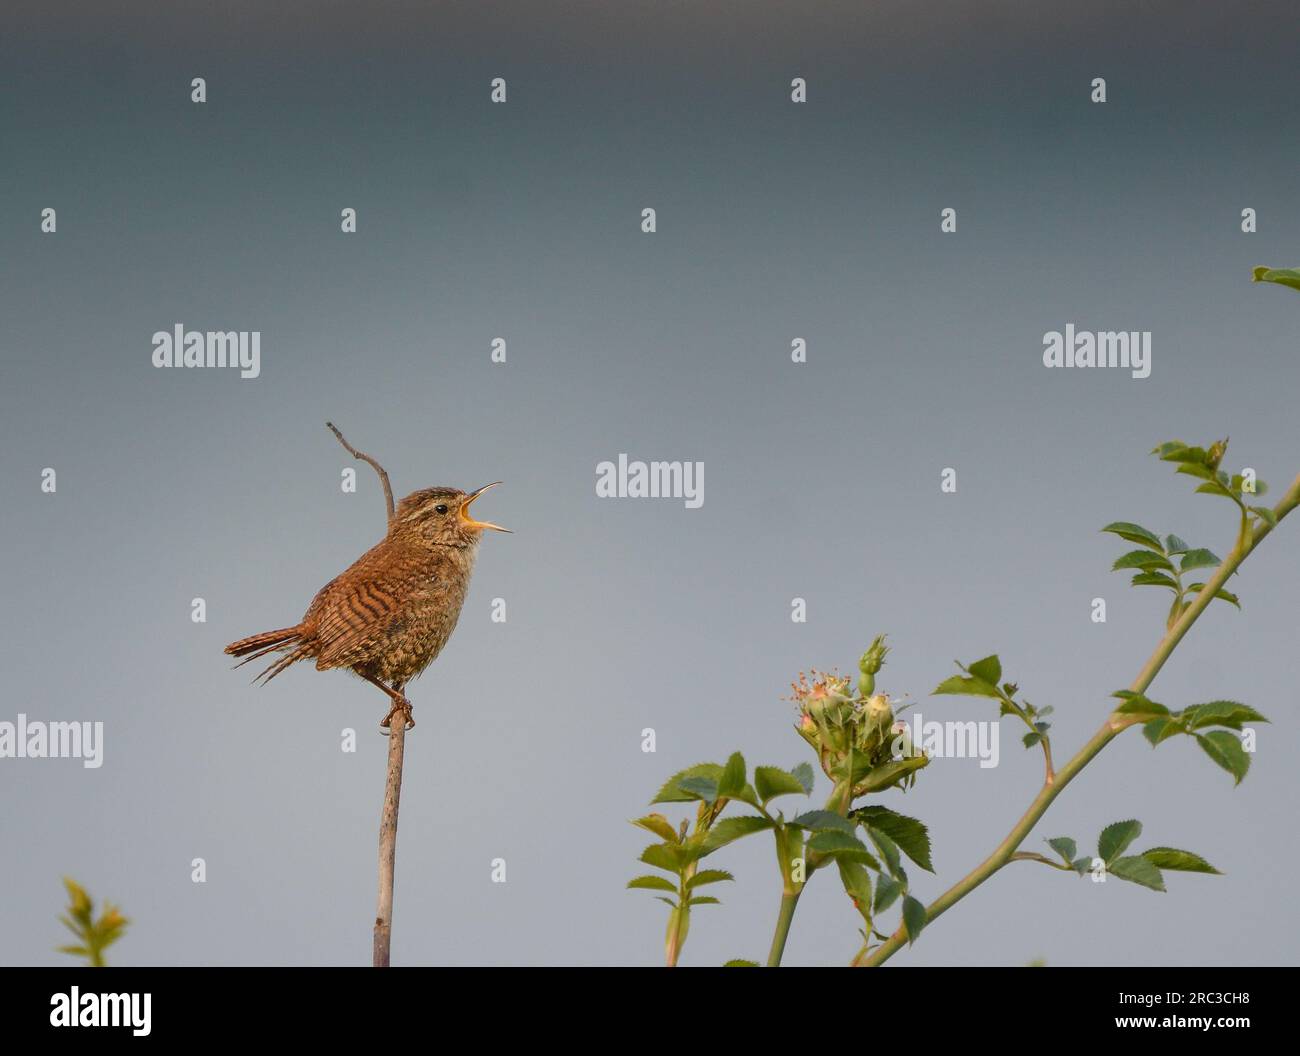 Wren perched on a branch and singing Stock Photo